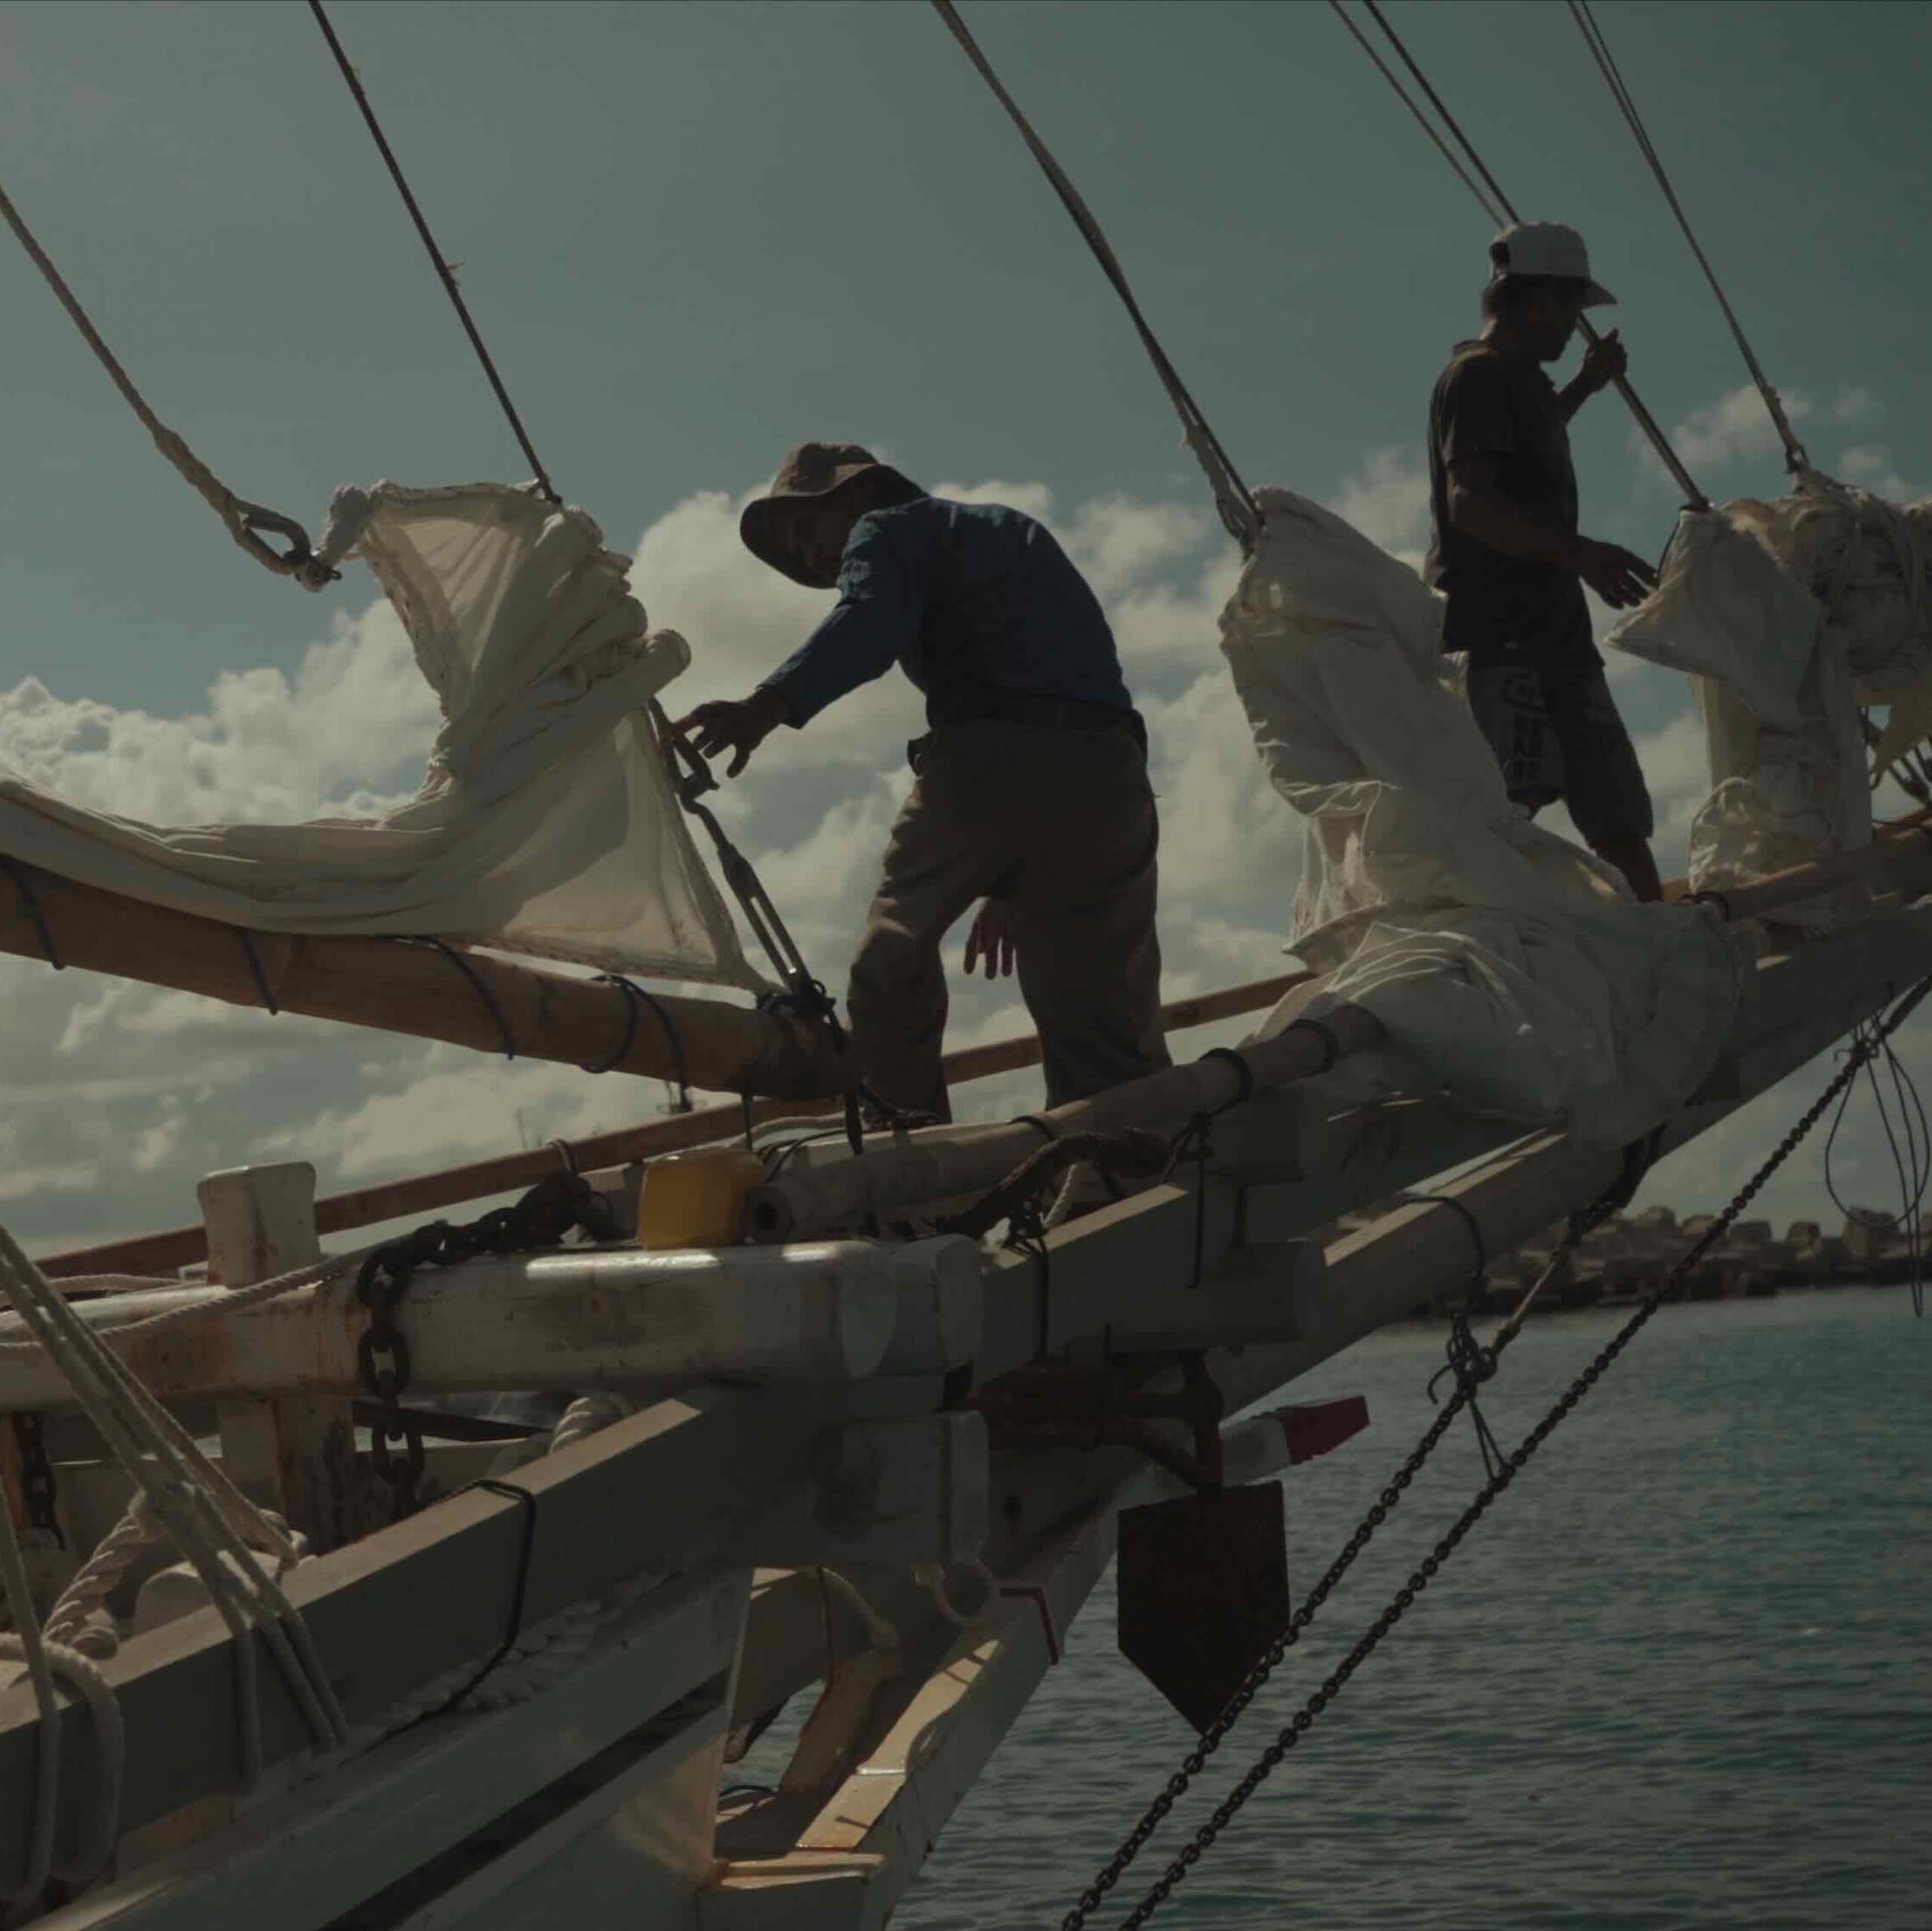 People working on the sails of a traditional boat